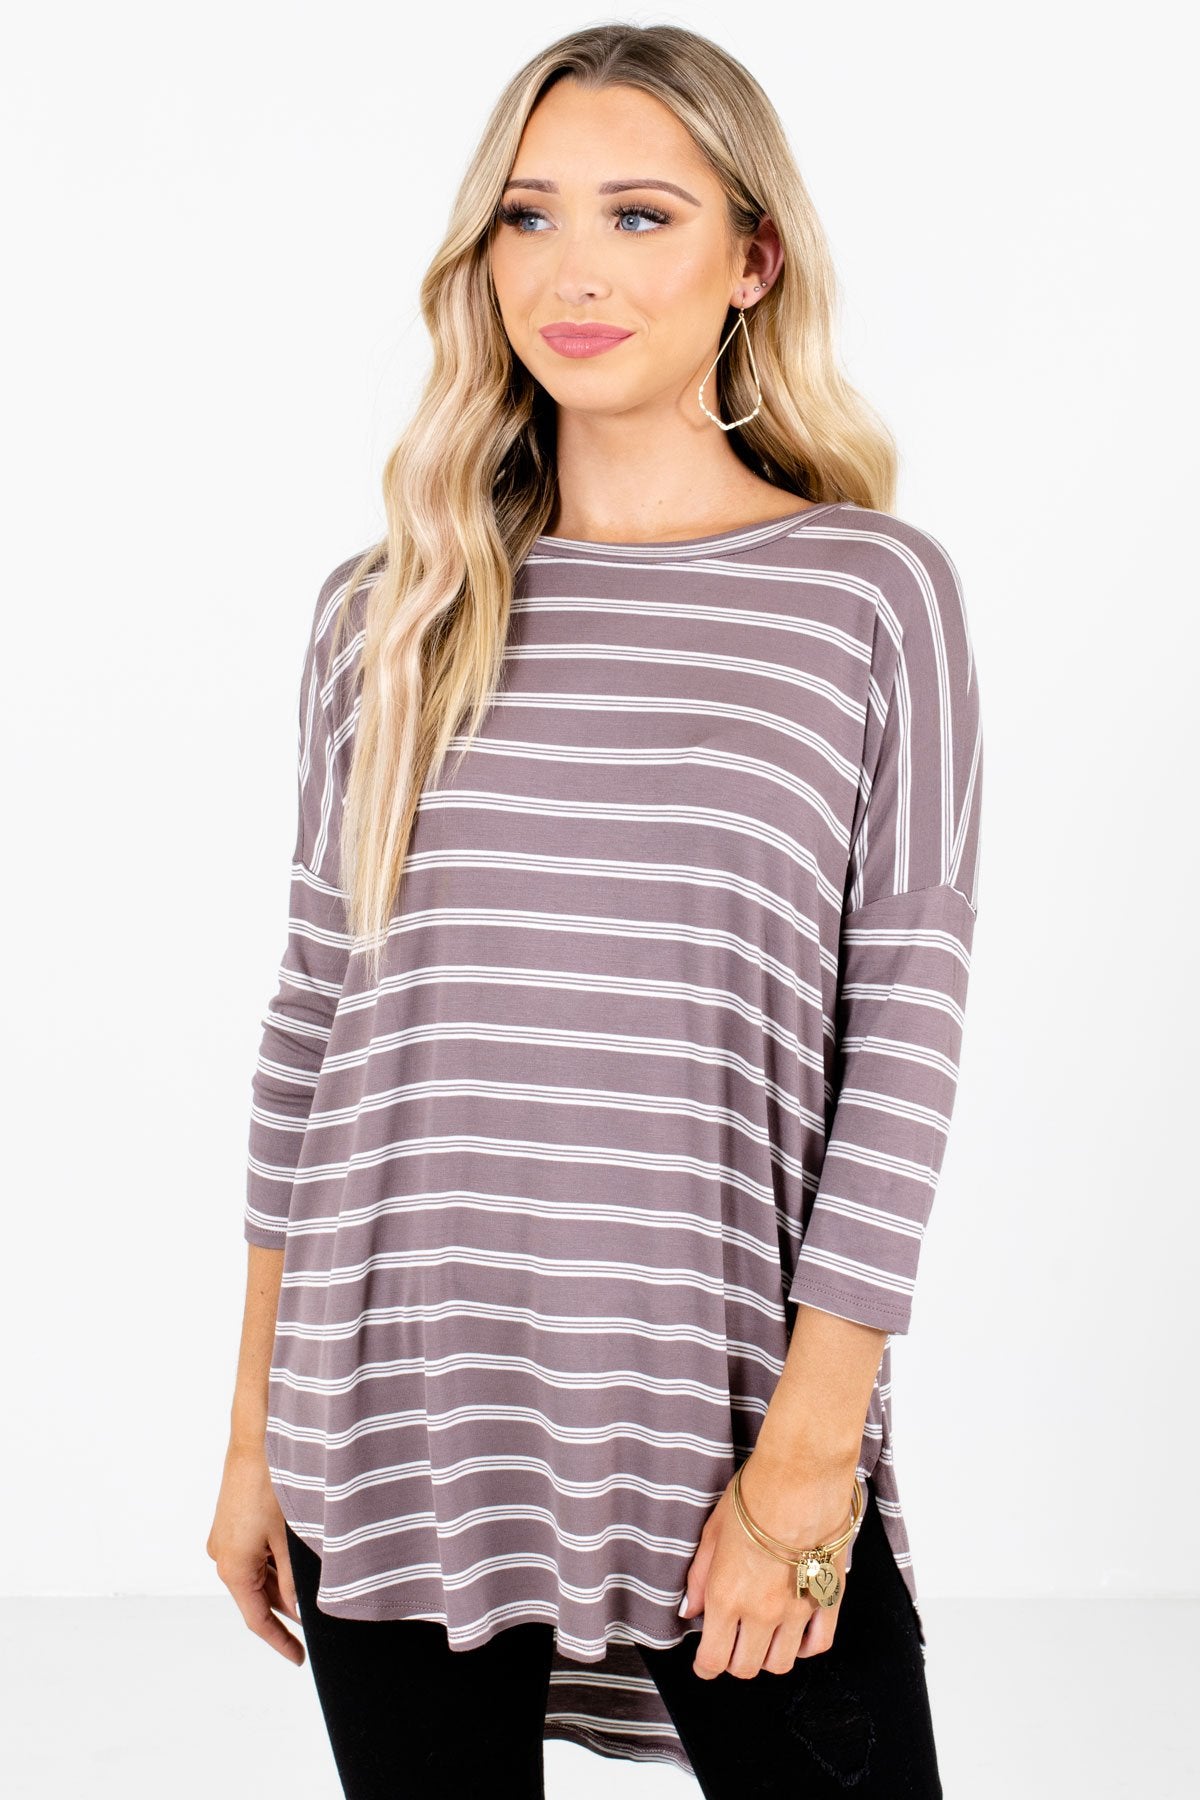 Just the Beginning Mocha Brown Striped Top | Boutique Tops